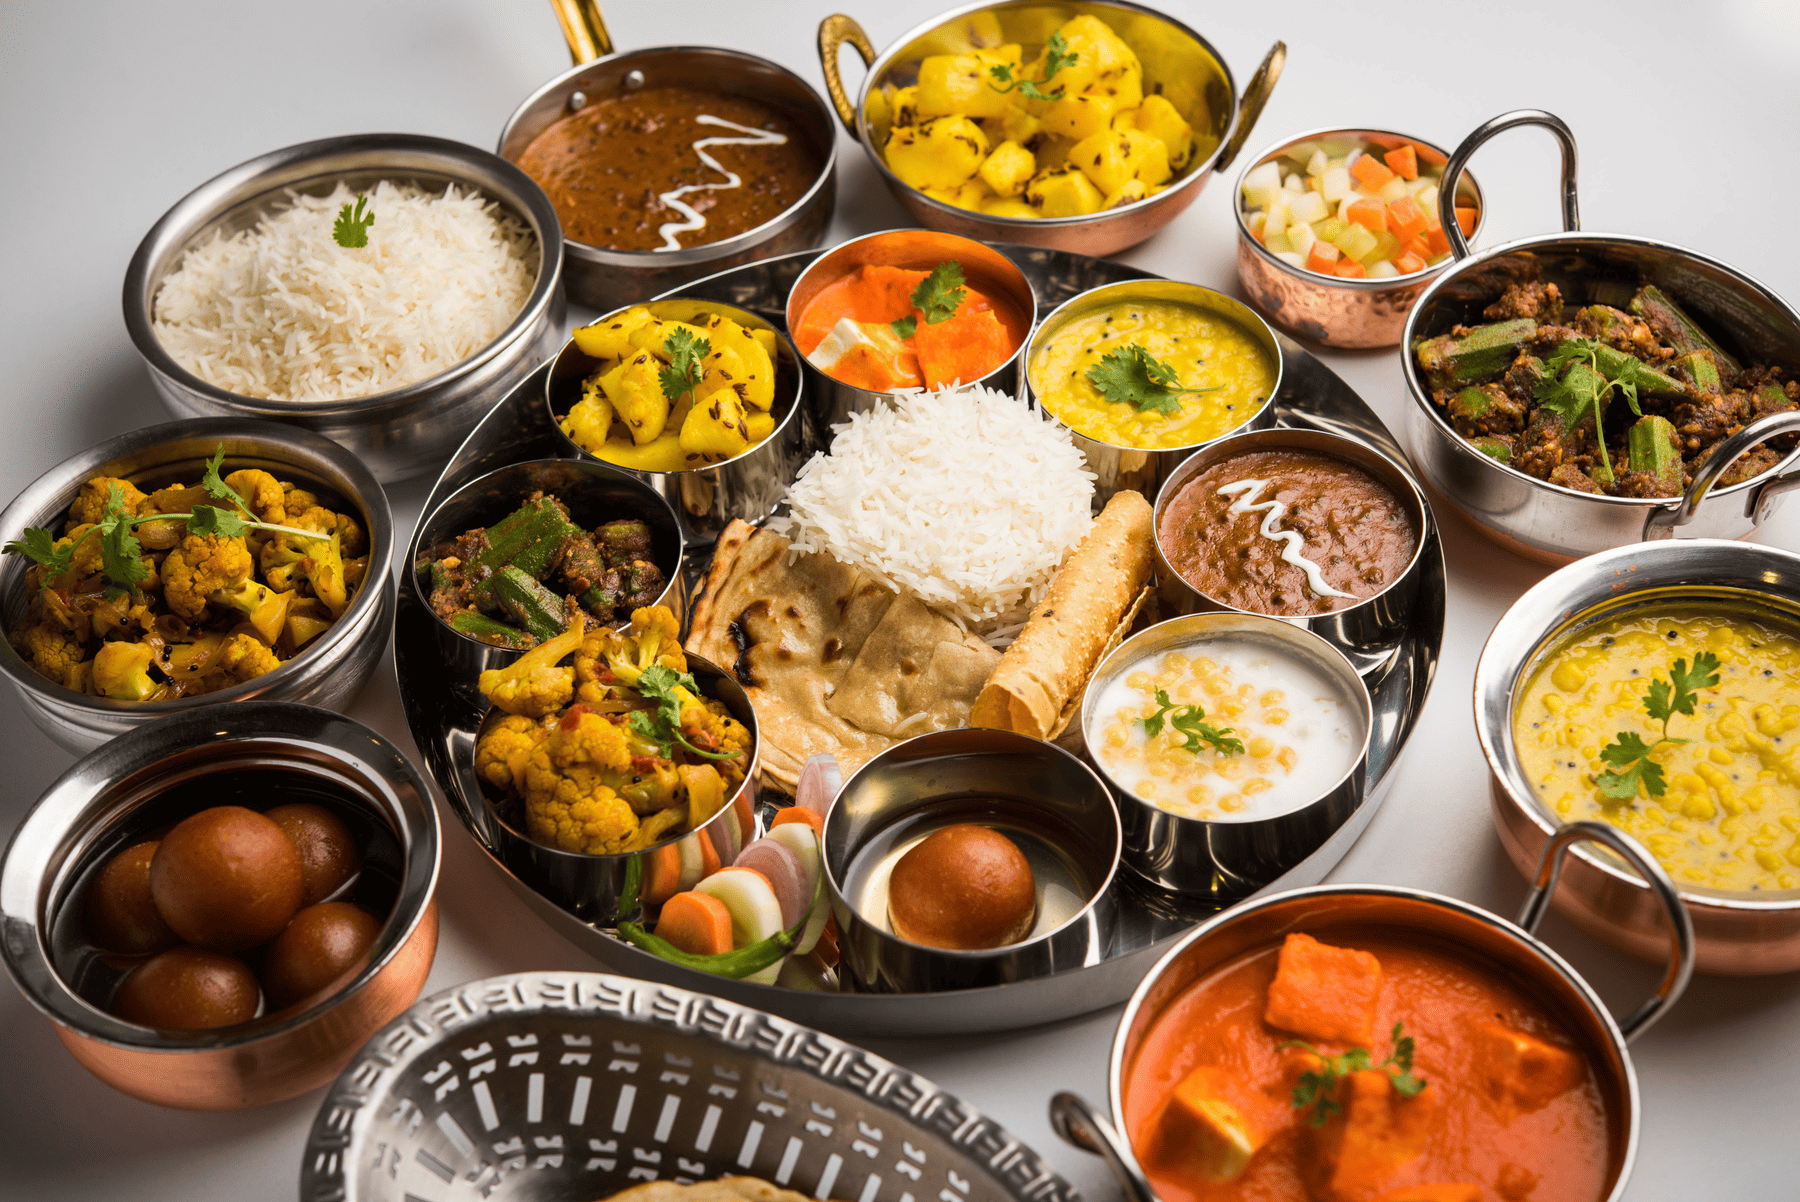 A traditional Indian thali showcasing a variety of vegetarian and non-vegetarian dishes